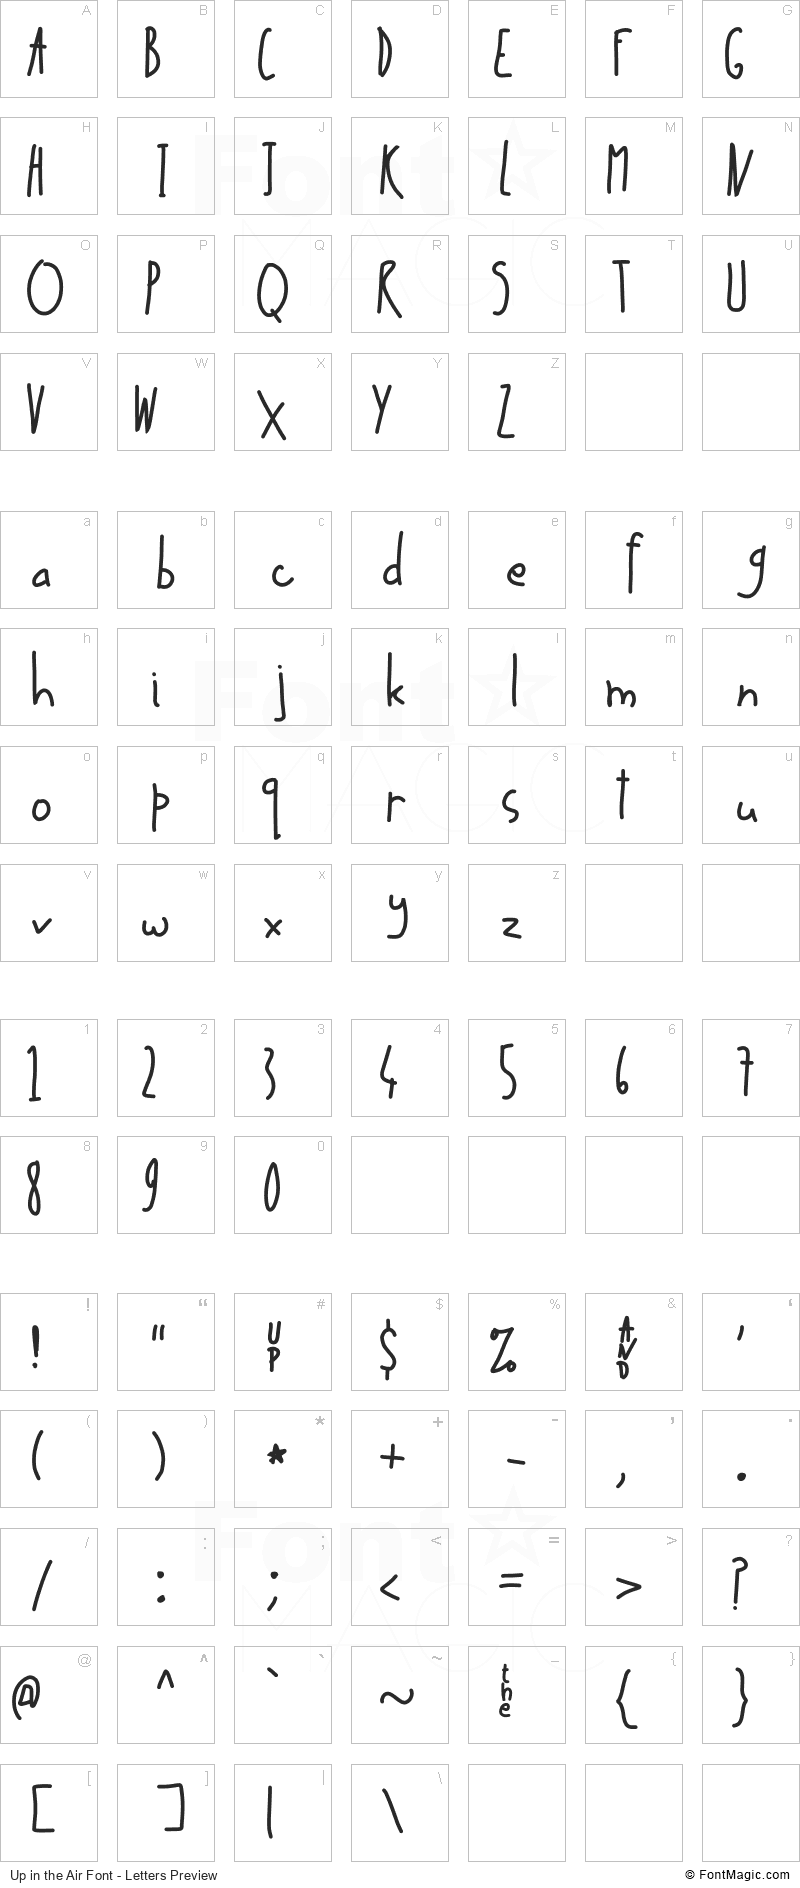 Up in the Air Font - All Latters Preview Chart